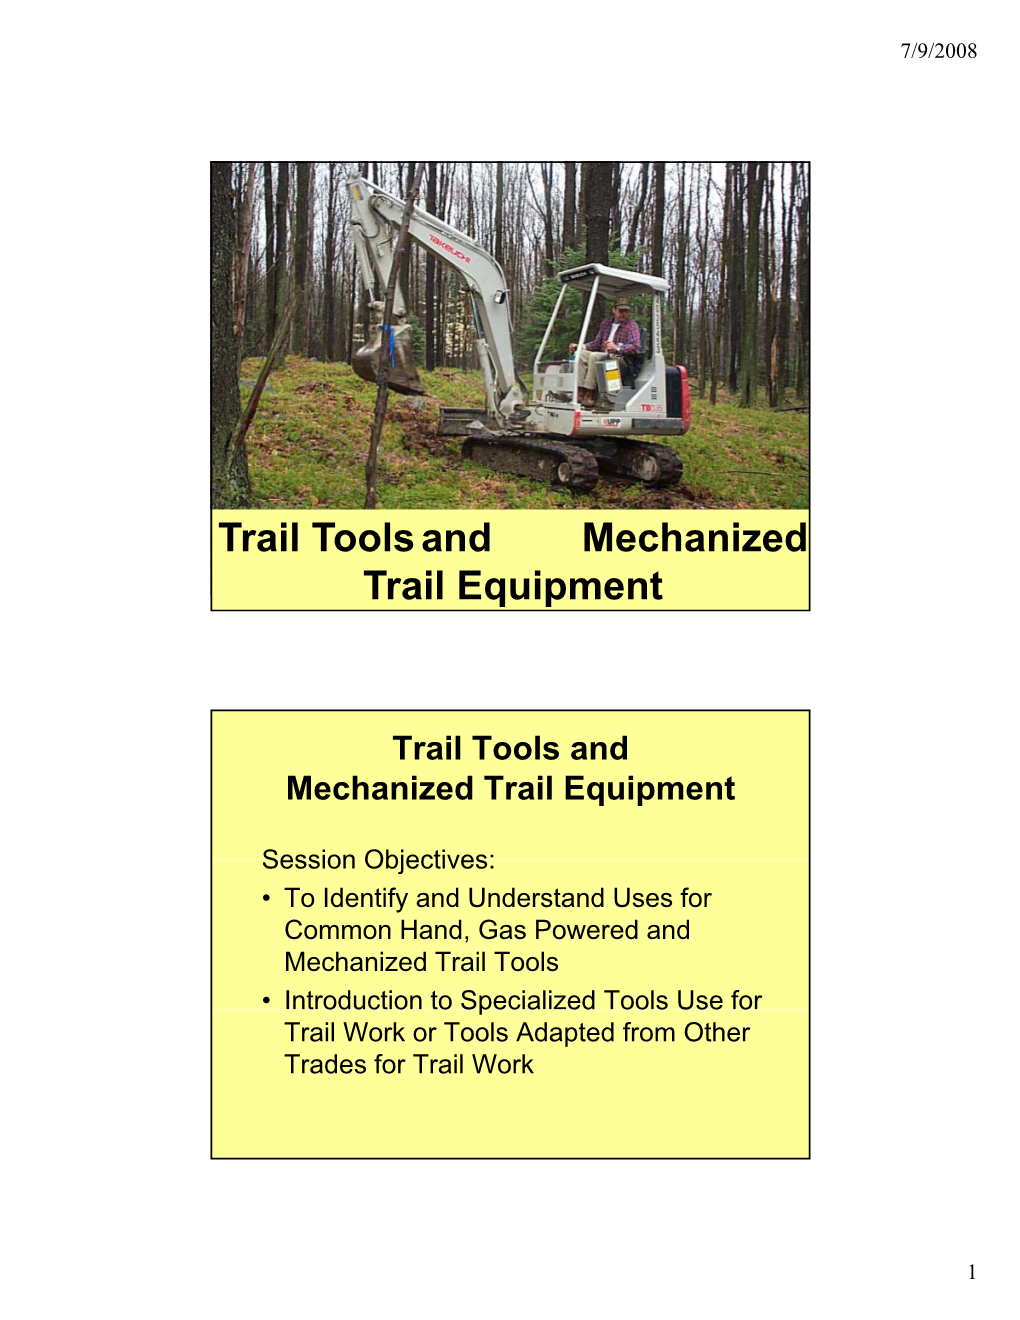 Trail Tools and Mechanized Trail Equipment